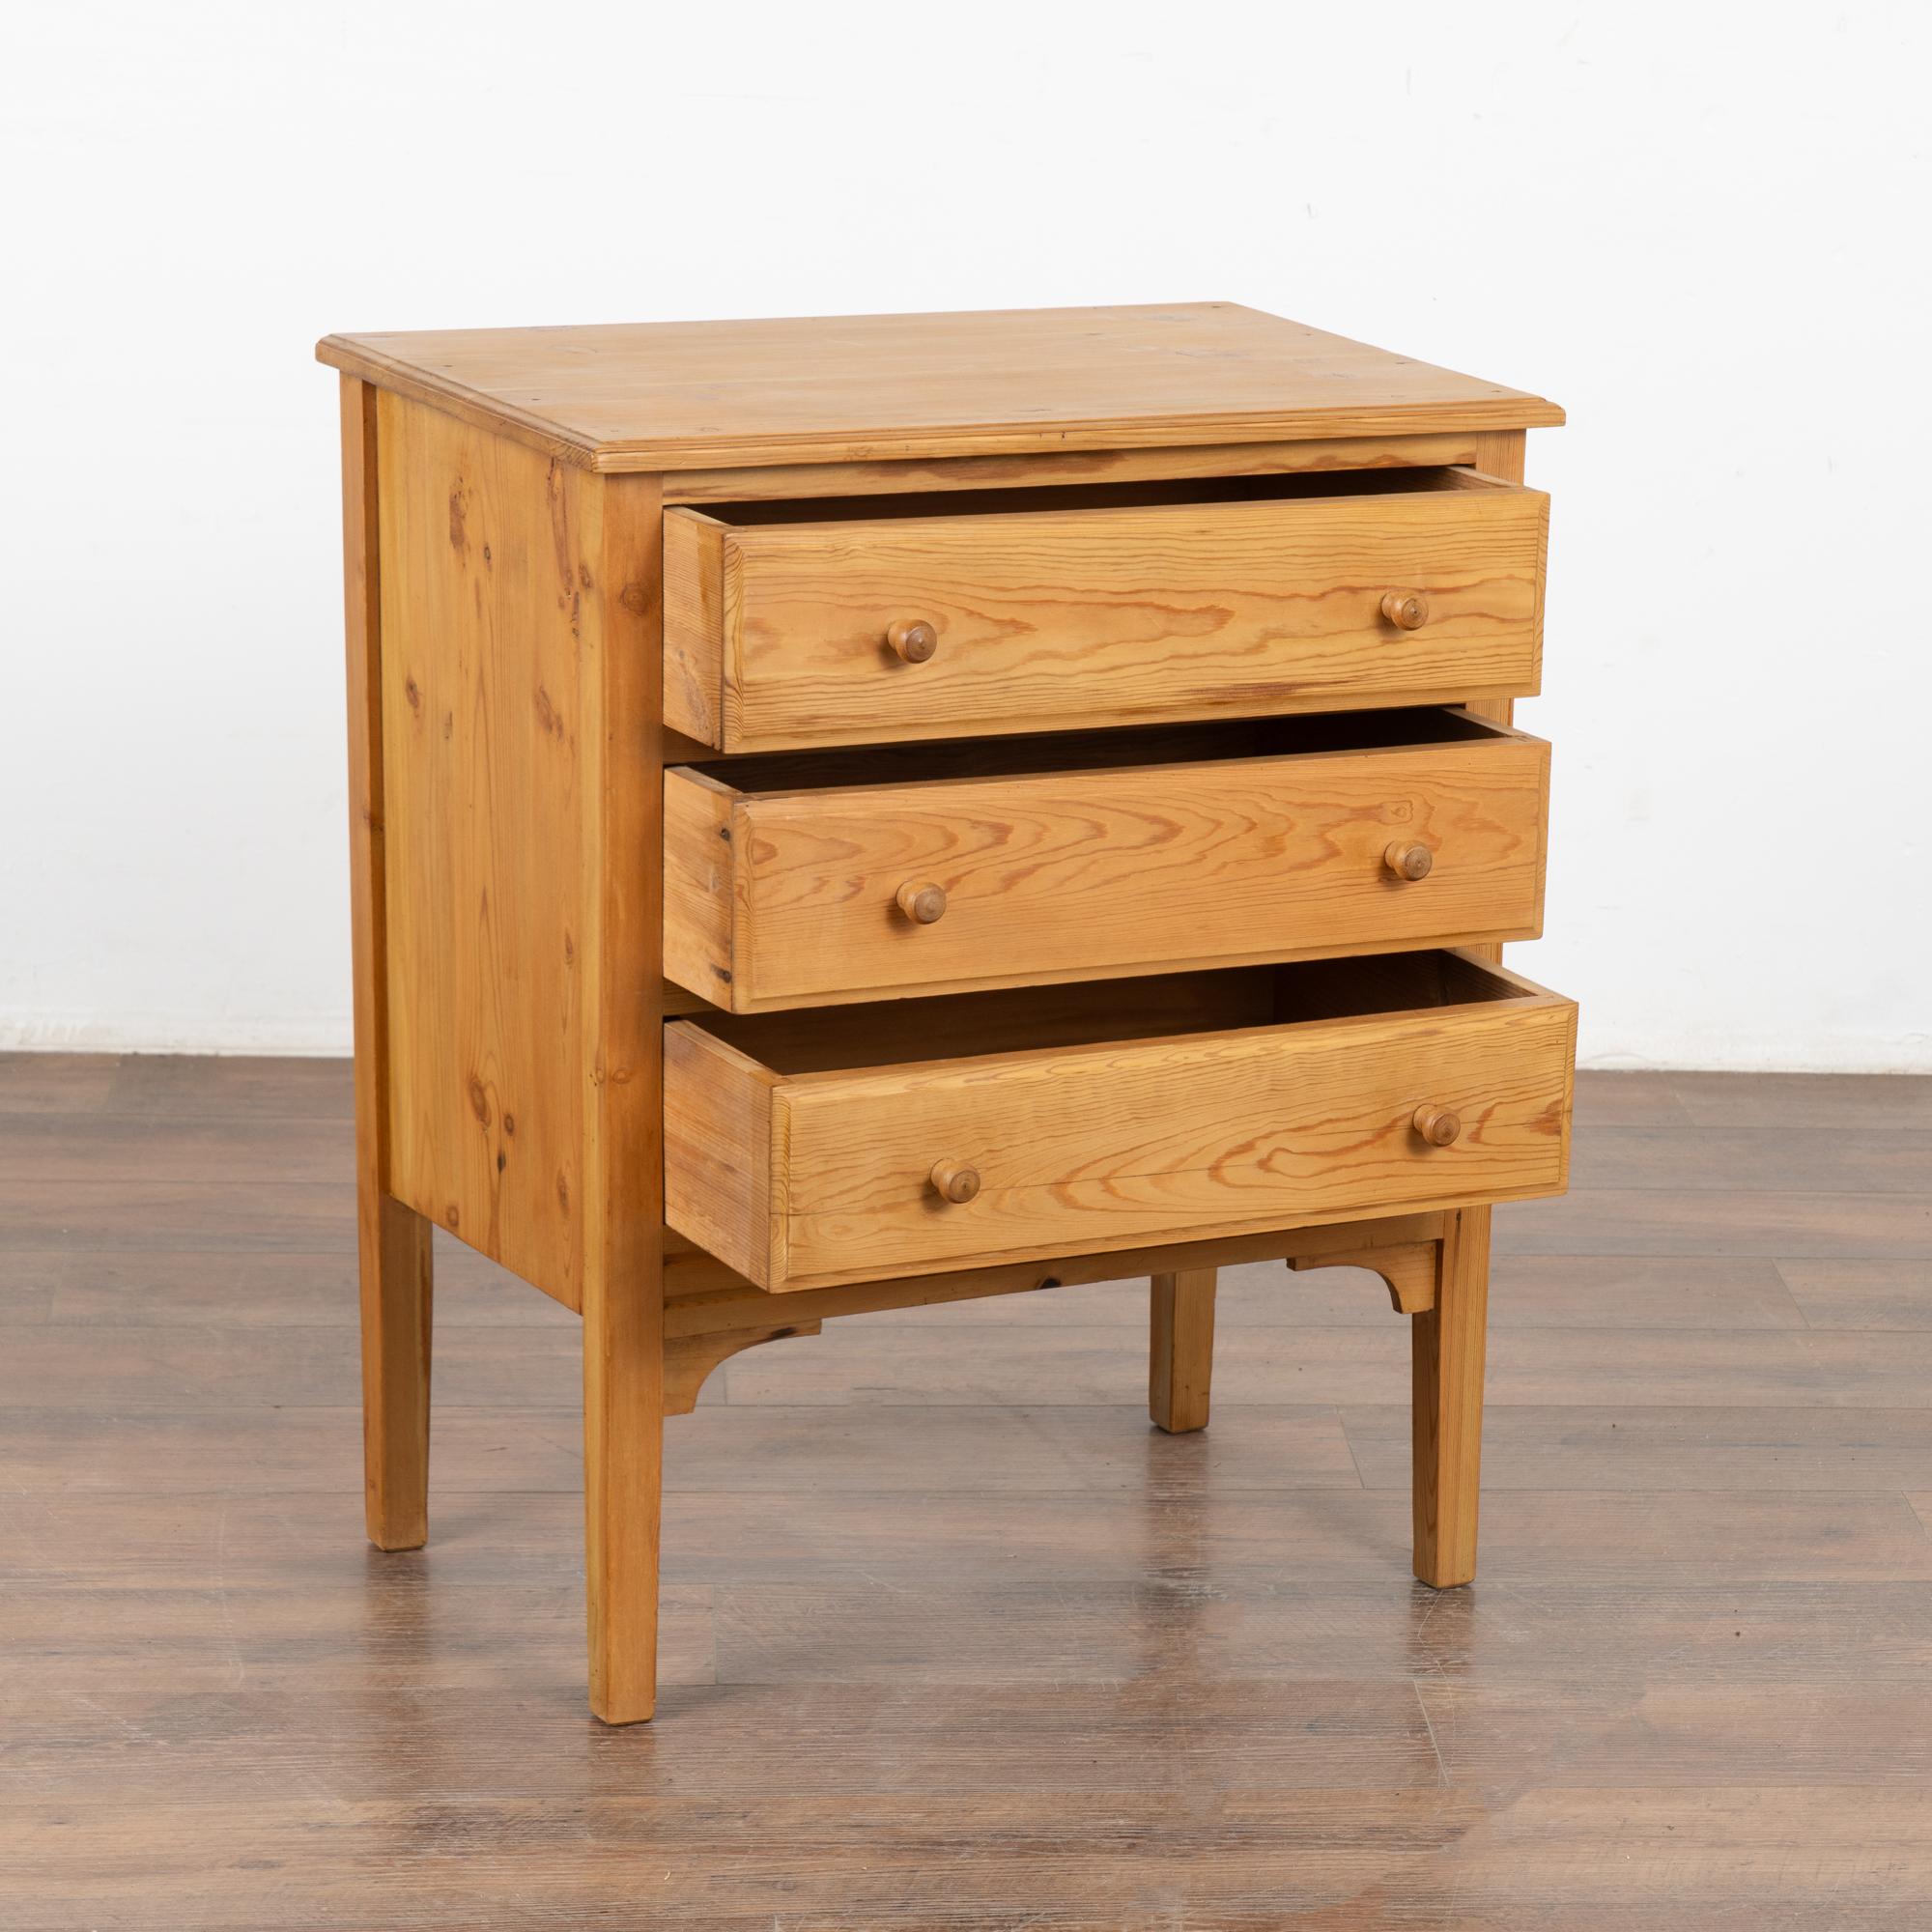 Country Vintage Pine Small Chest of Drawers Nightstand, Denmark circa 1940 For Sale